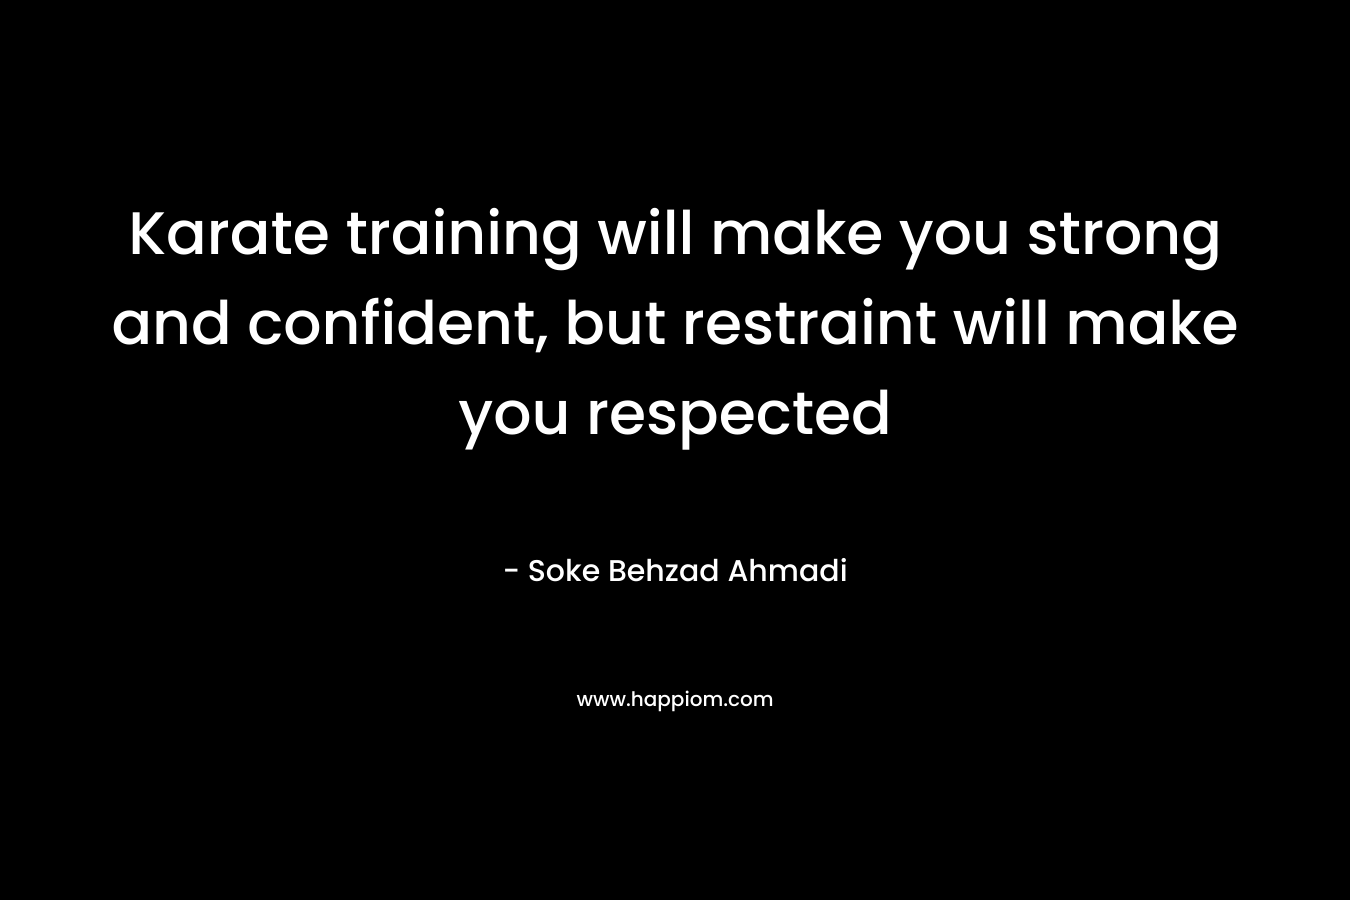 Karate training will make you strong and confident, but restraint will make you respected – Soke Behzad Ahmadi